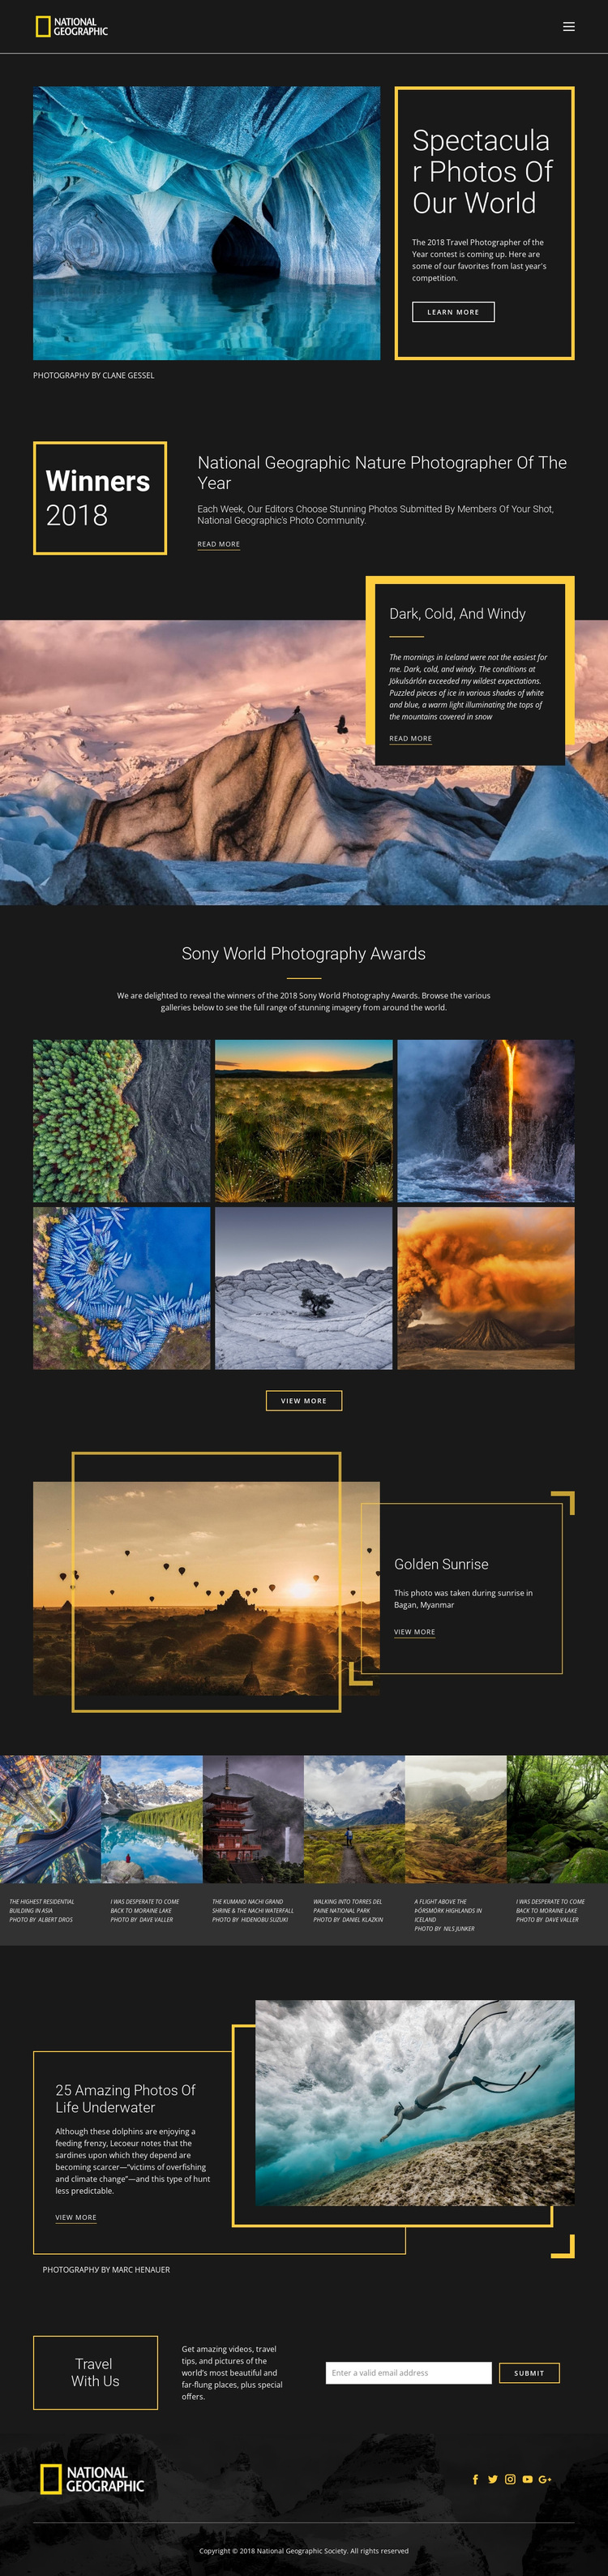 Pictures of nature HTML5 Template